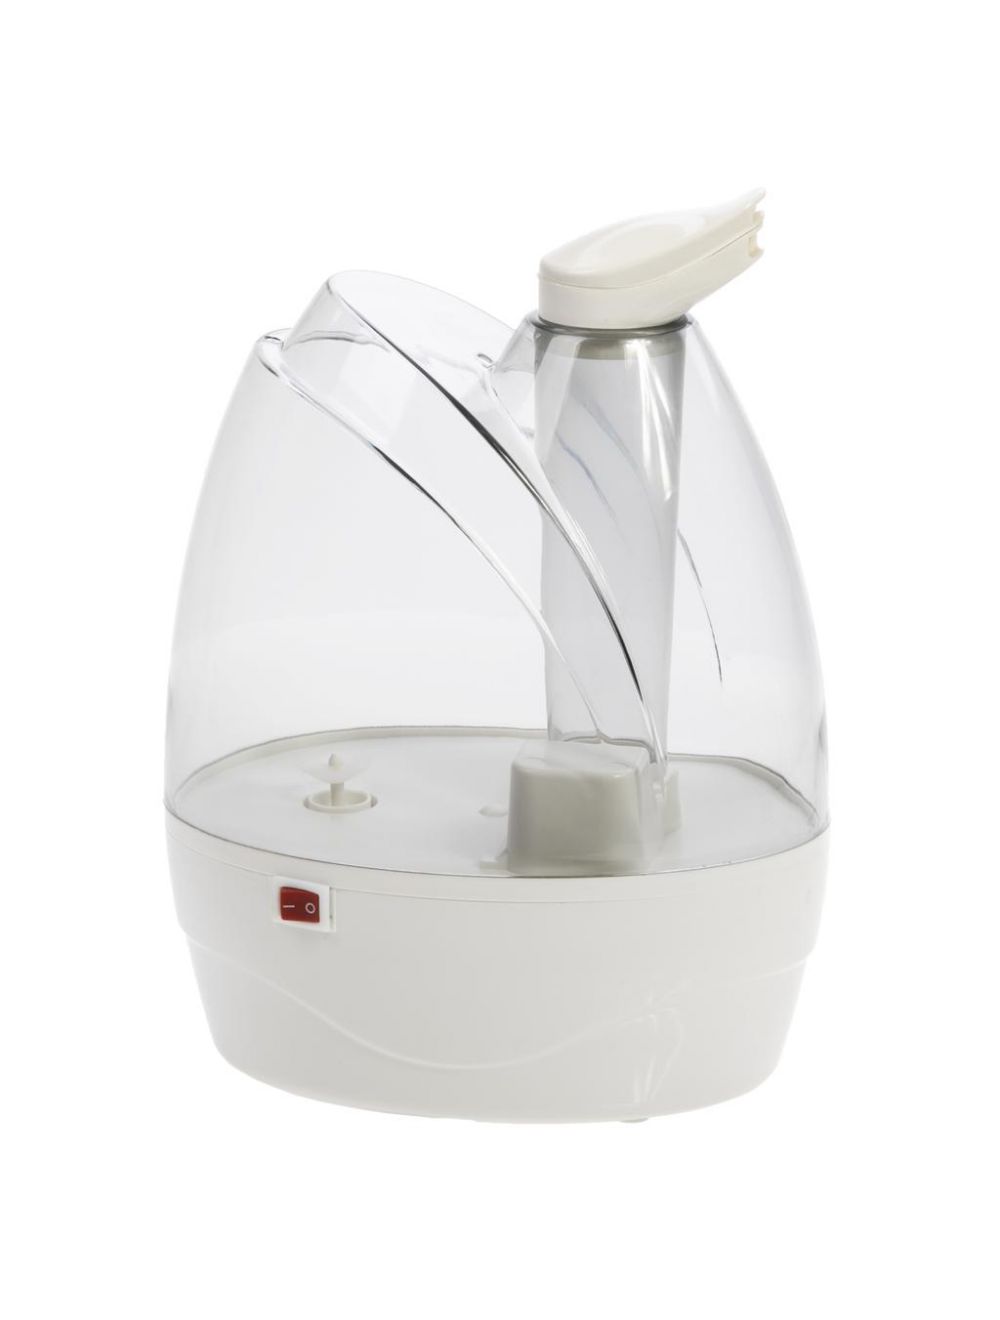 Geepas 32W Humidifier | Double Nozzle, 9 Hours of Continuous Mist, 2.6L Capacity GUH63012UK